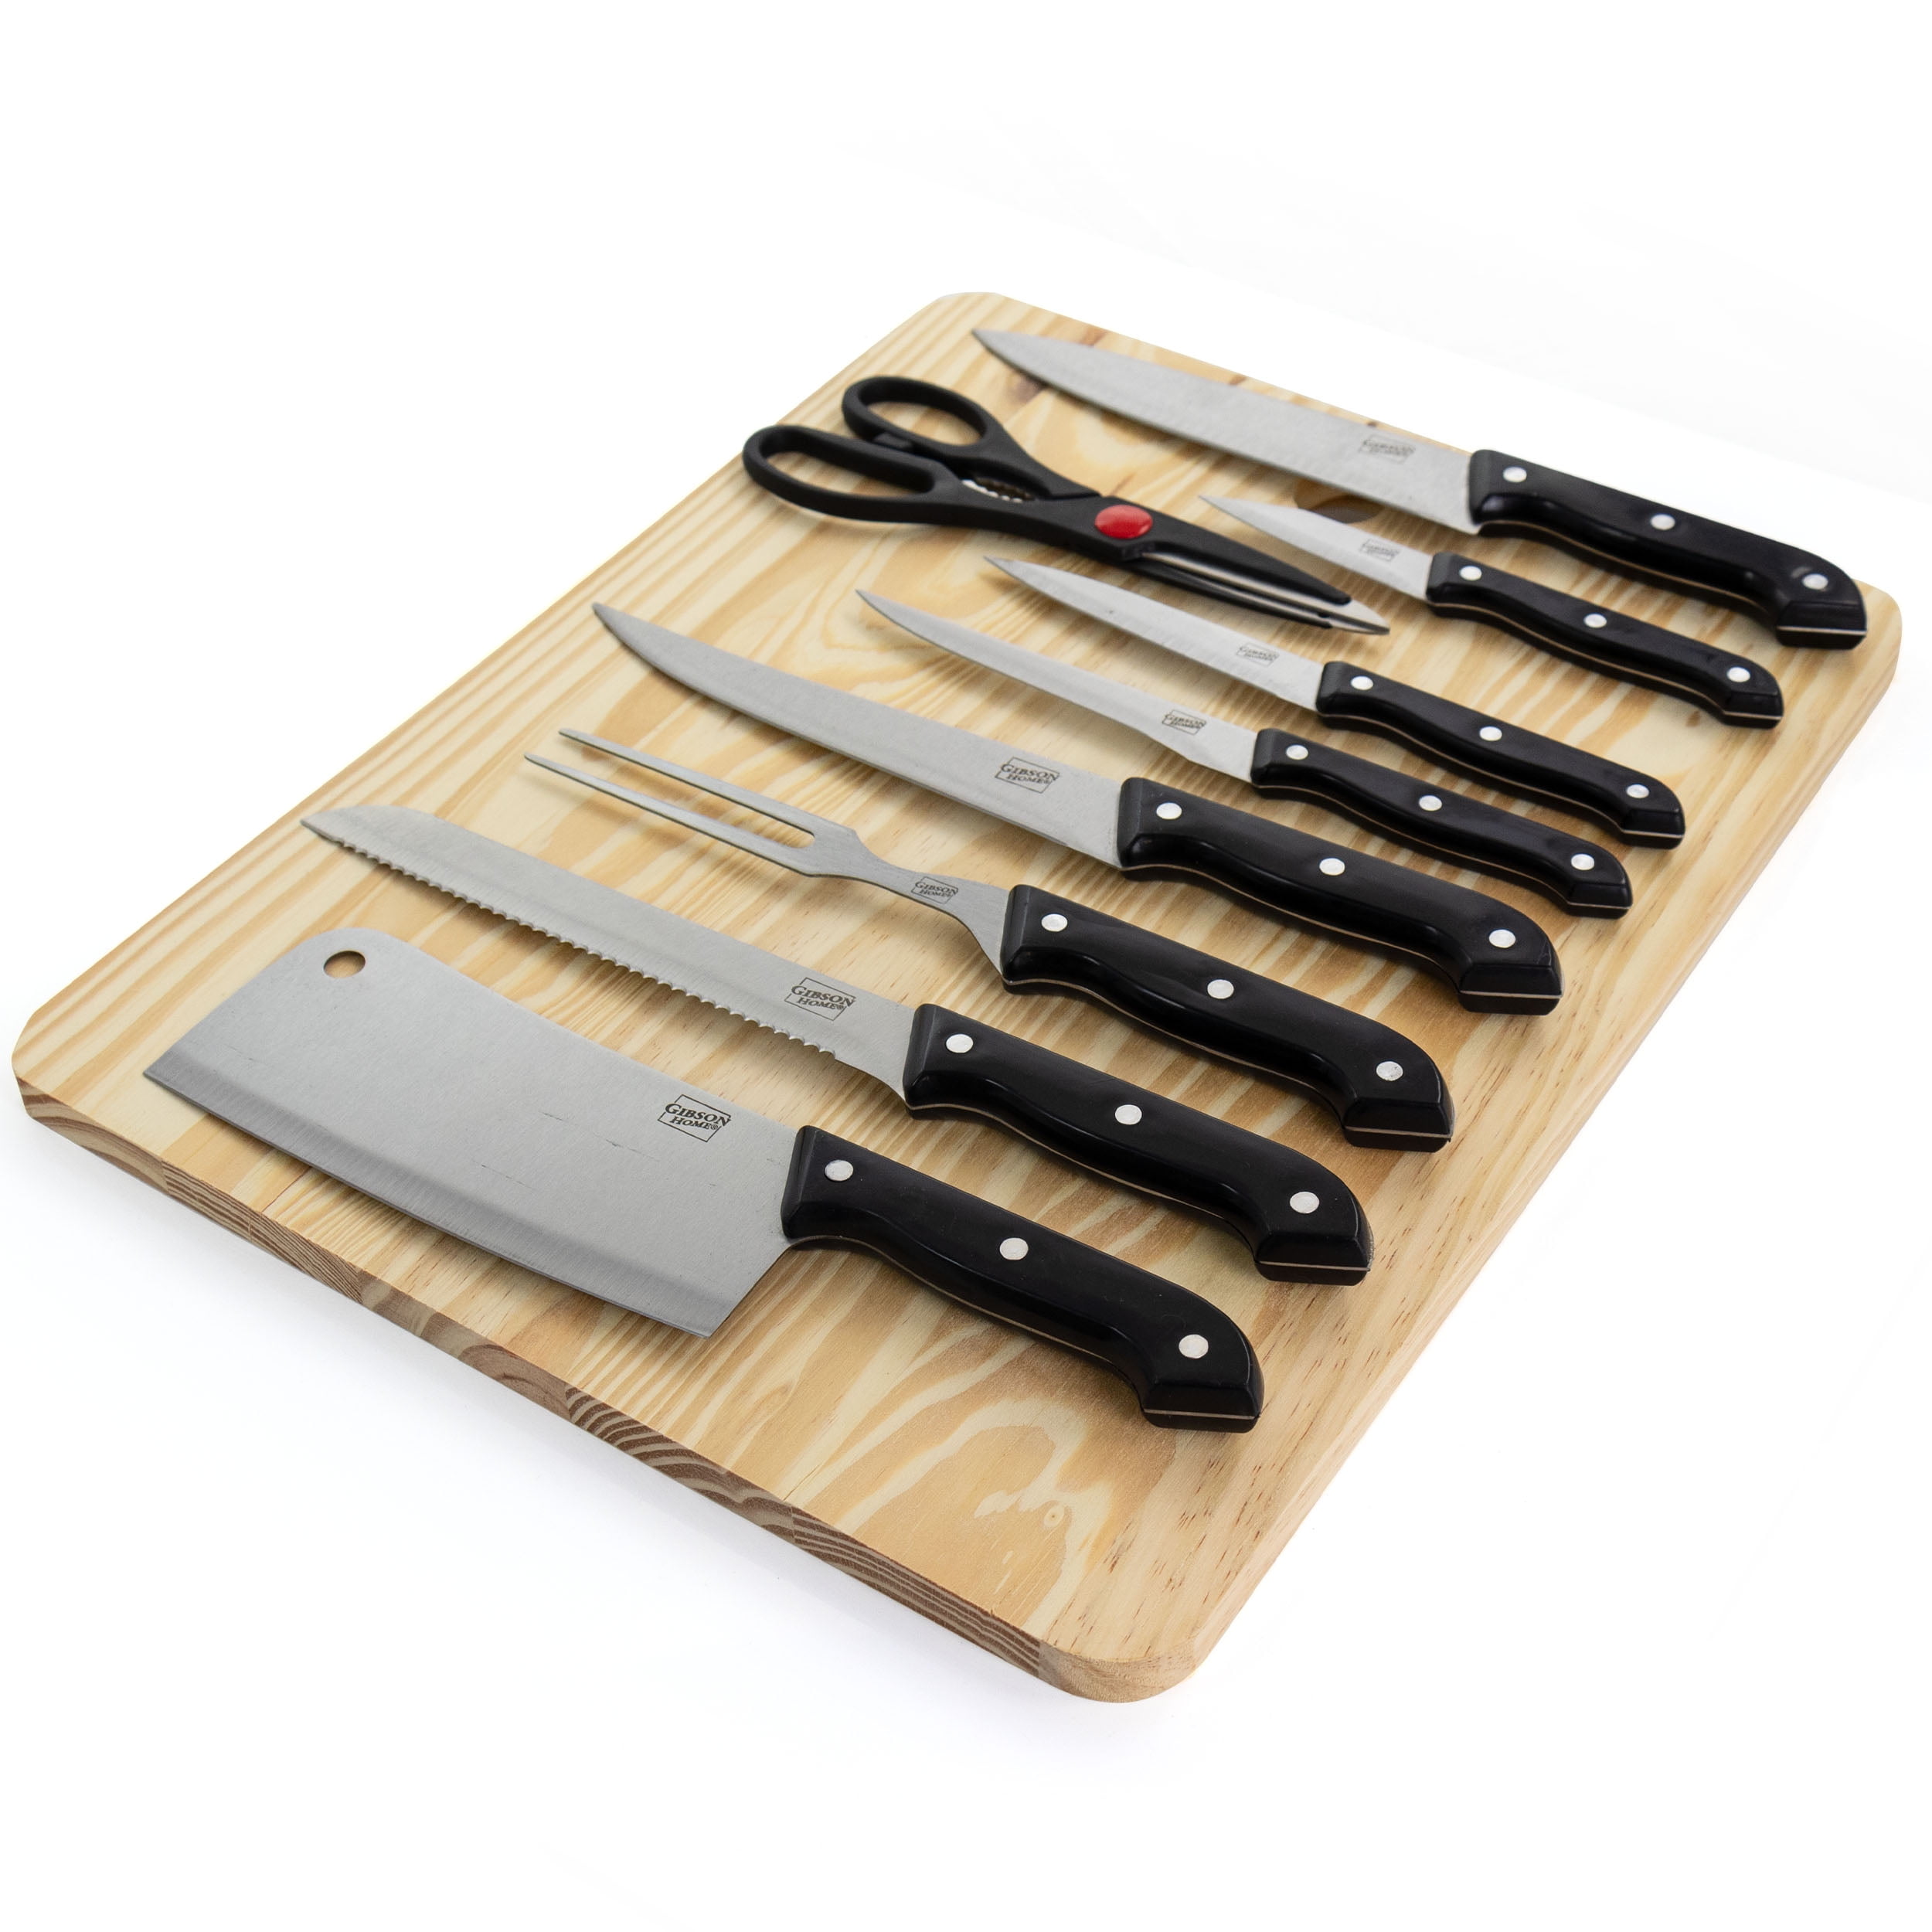 Home Basics 10 Piece Knife Set with Cutting Board